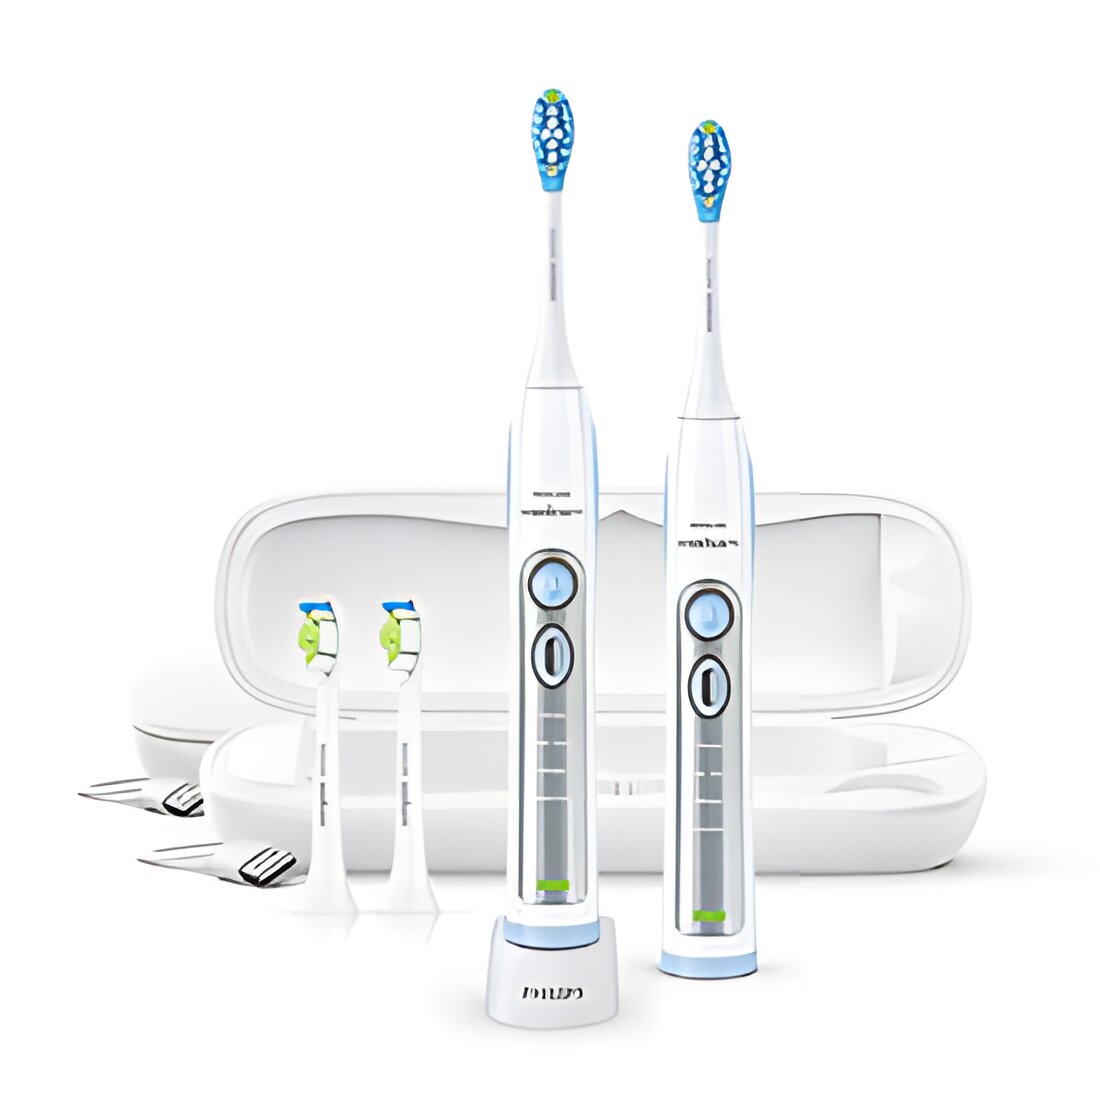 Free Philips Toothbrush Products Testing Opportunity